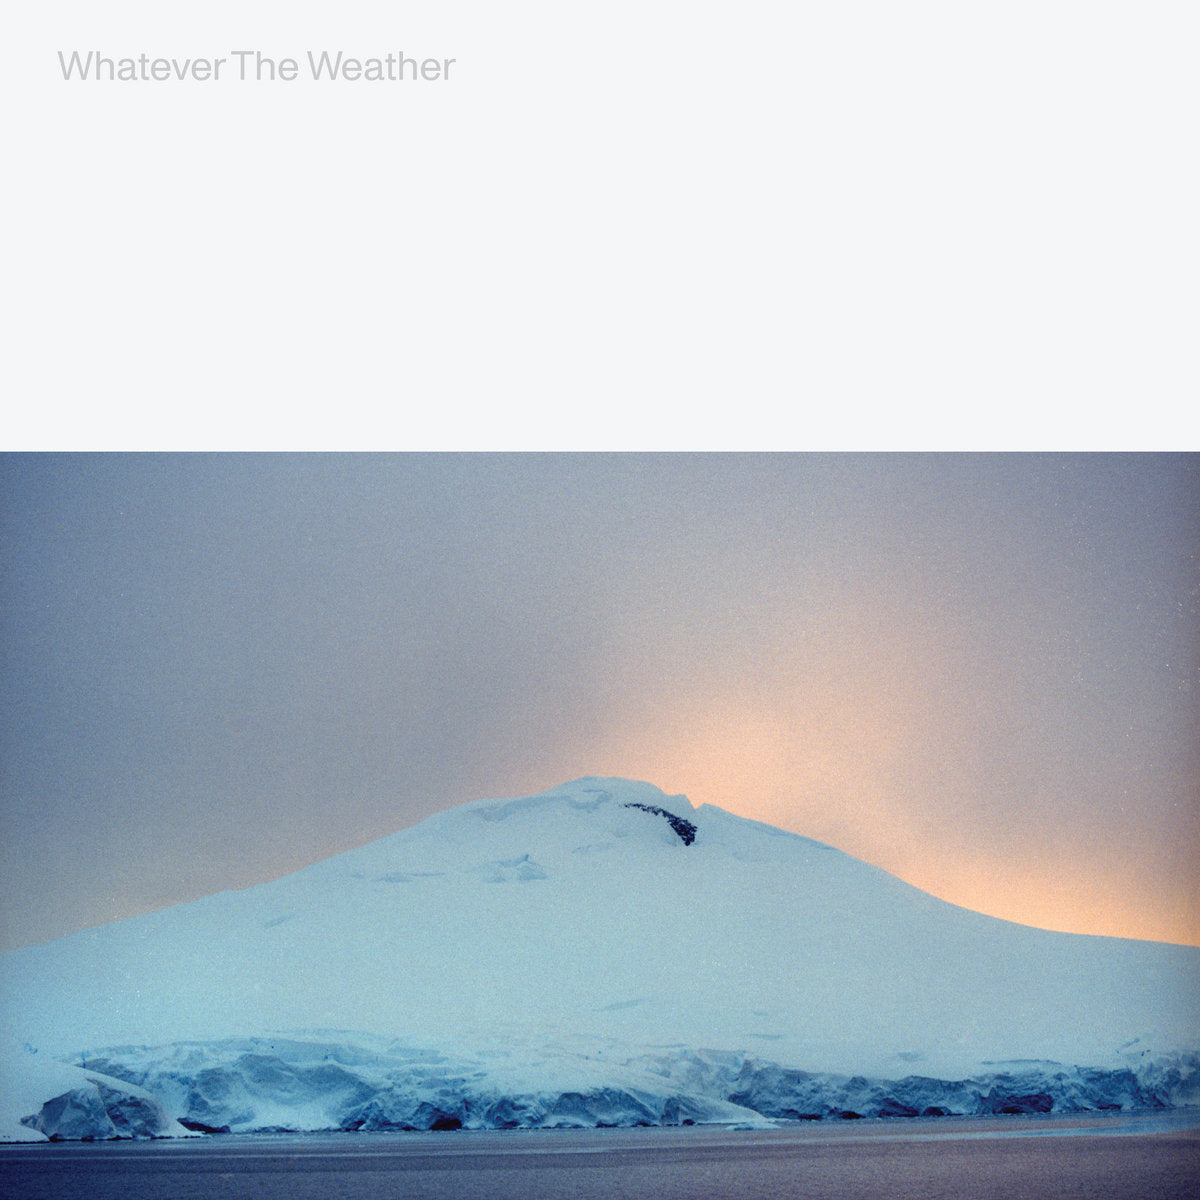 Whatever The Weather: Whatever The Weather (Vinyl LP)